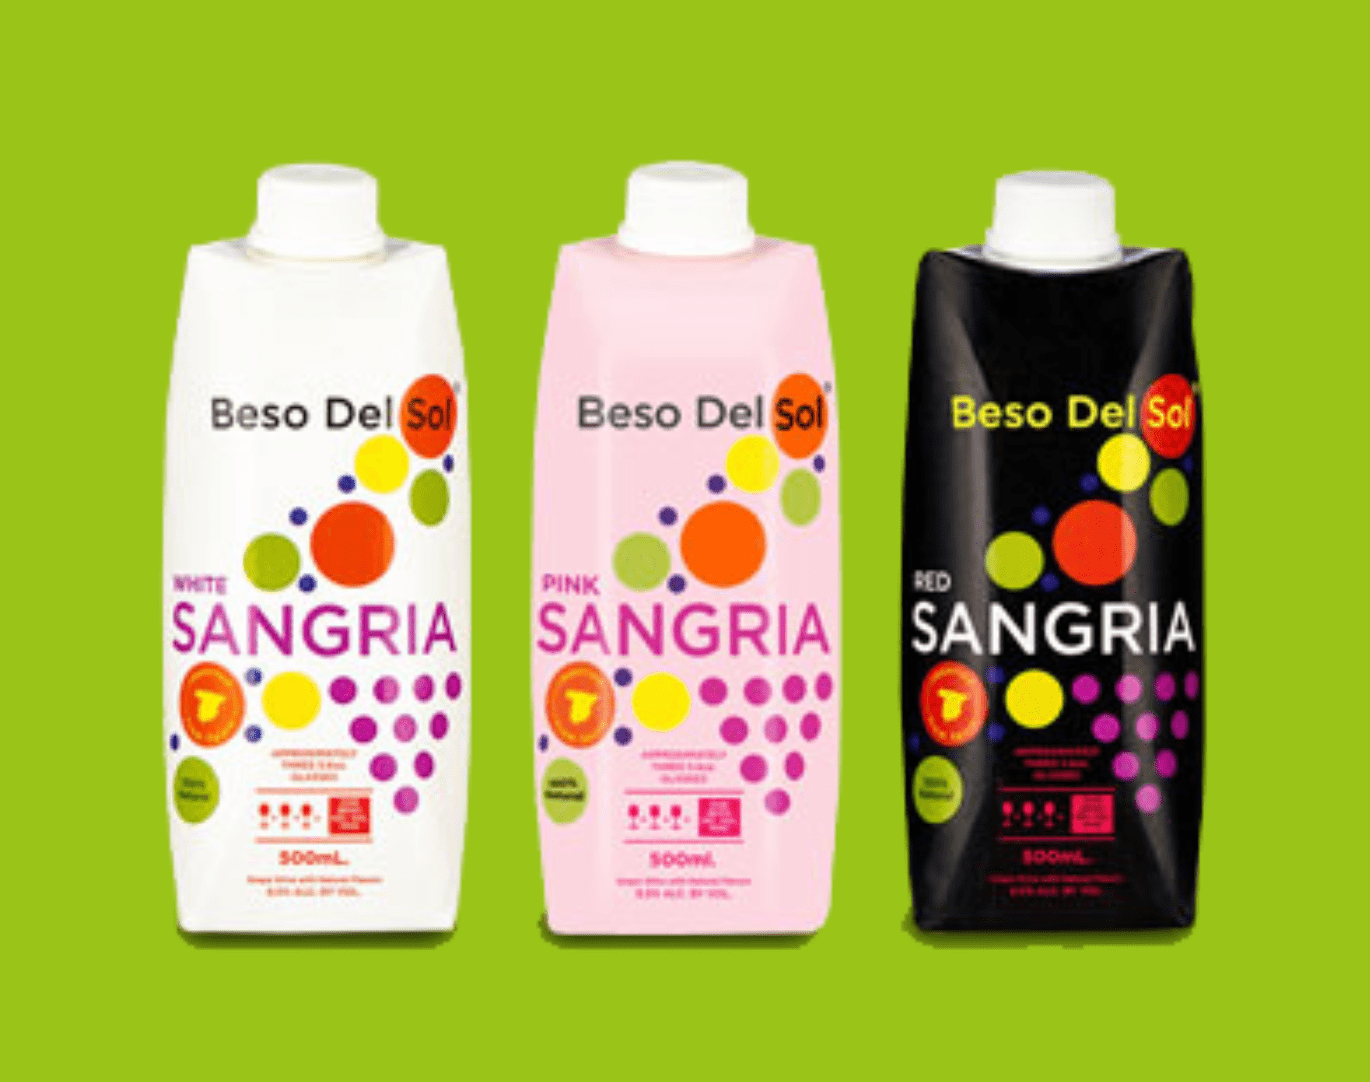 beso del sol carton boxes packaging inspiration